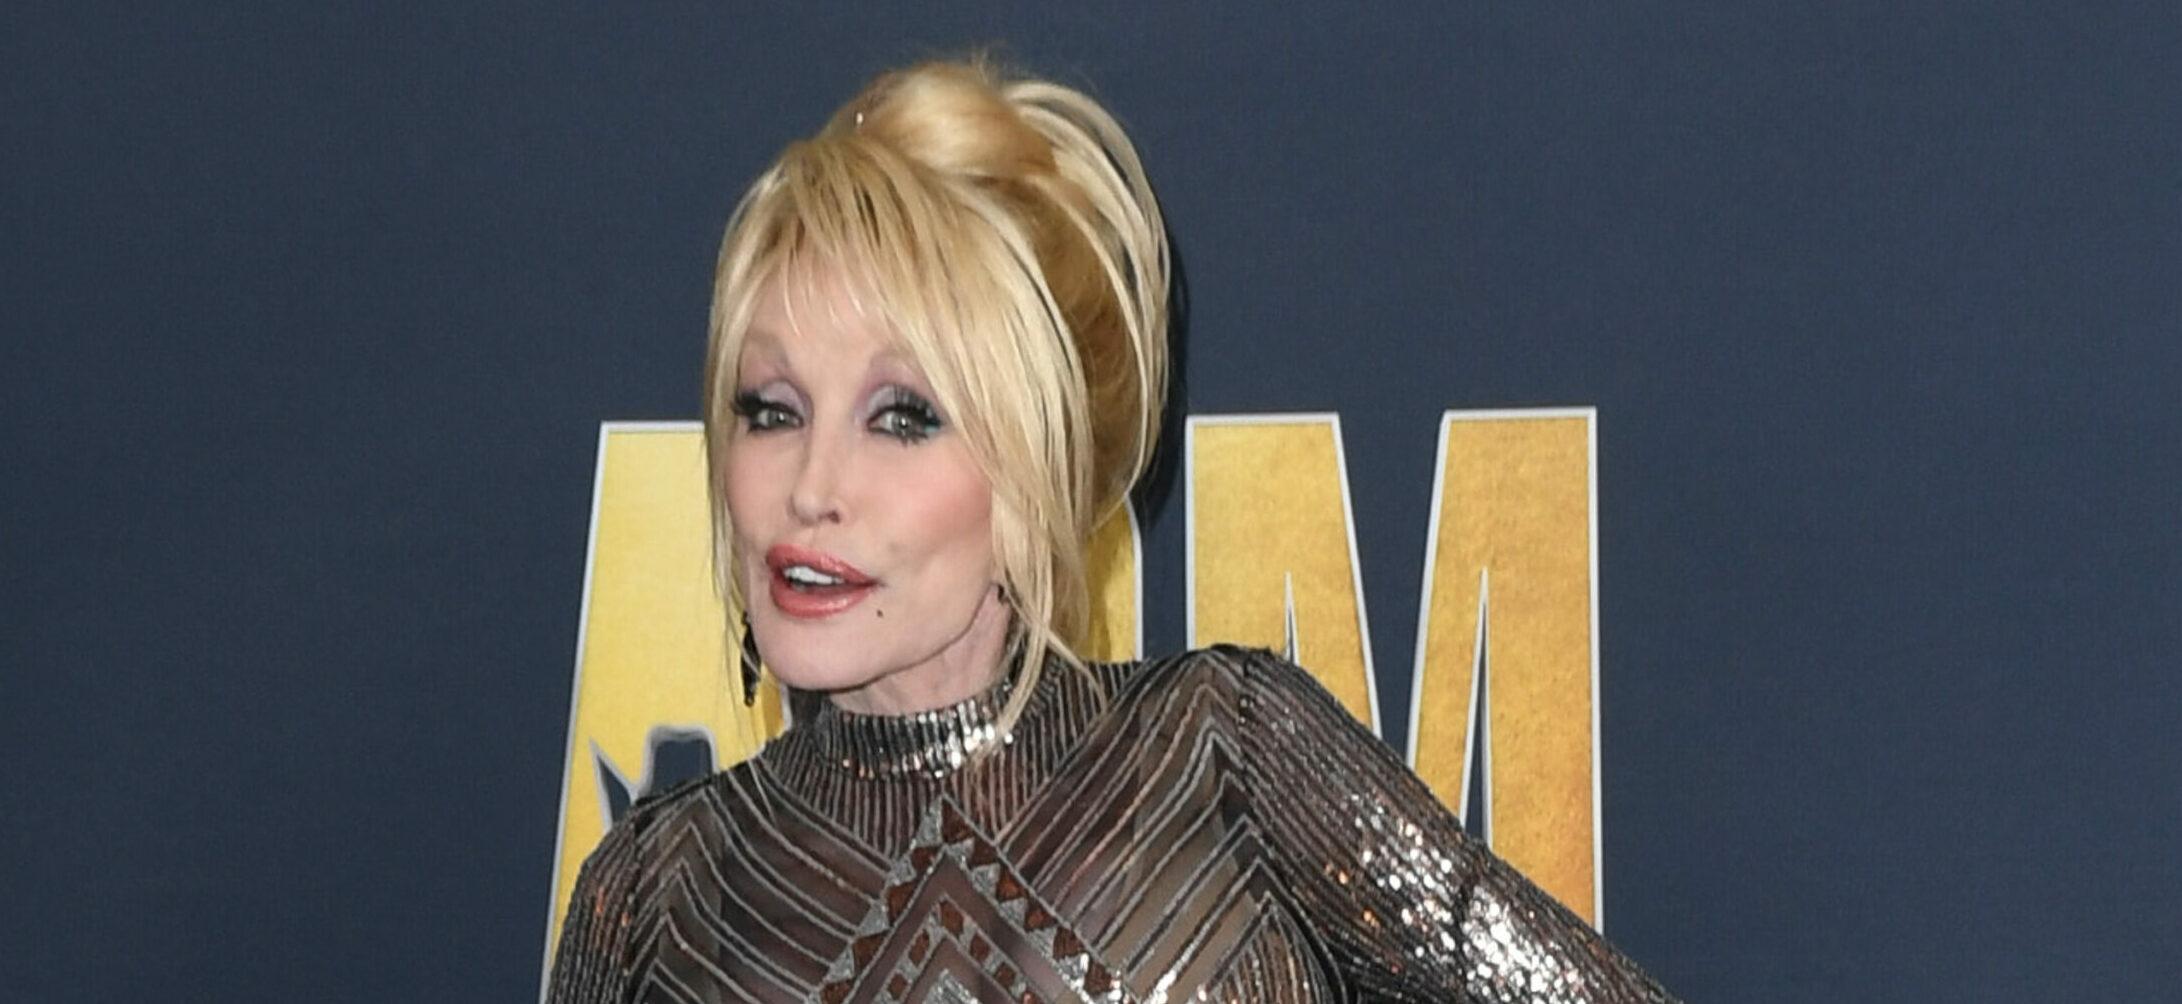 Dolly Parton Vows Never To Quit Her Music Career, Would Rather ‘Drop Dead’ On Stage